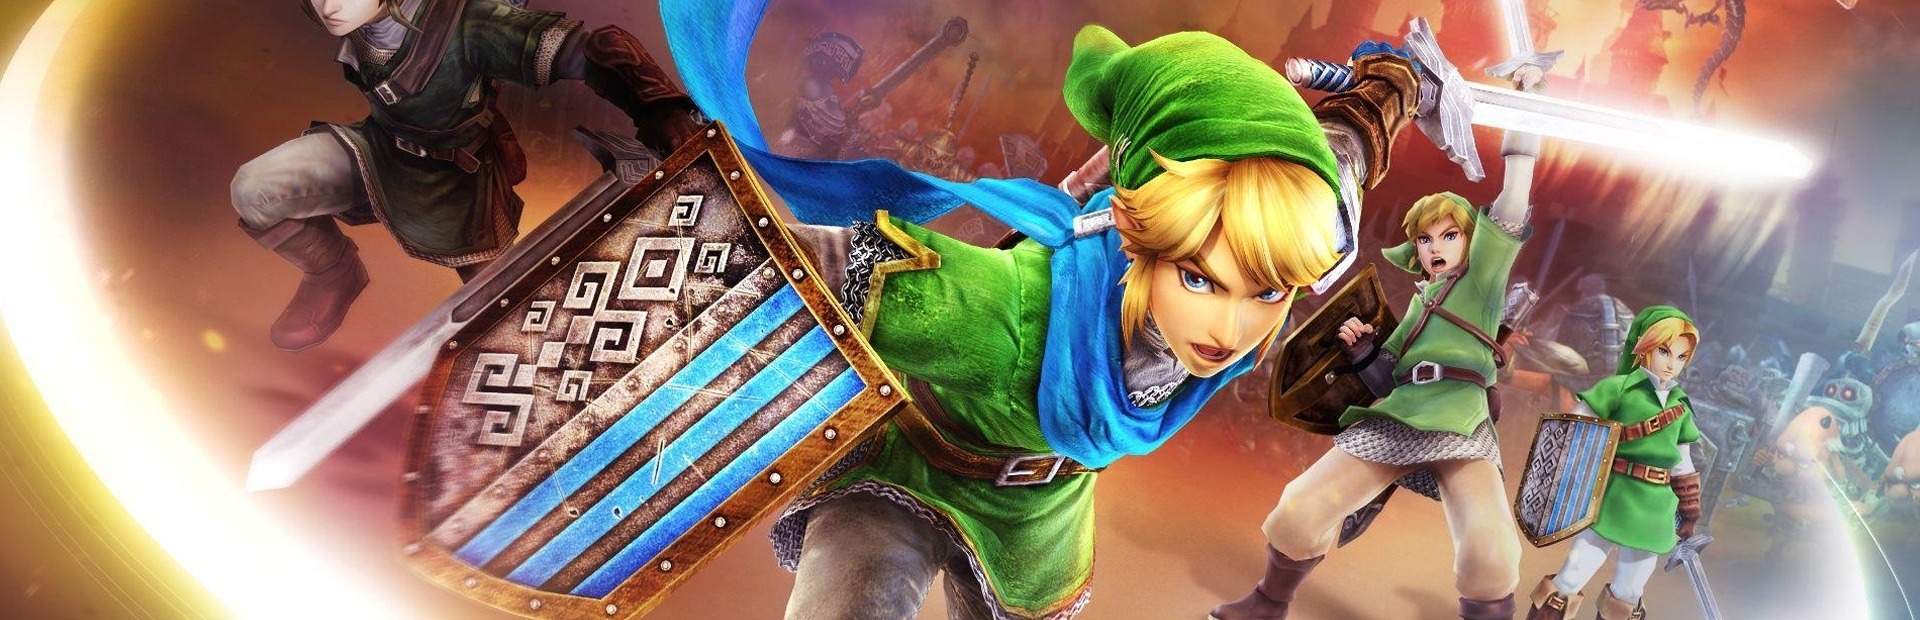 Hyrule Warriors Definitive Edition Switch